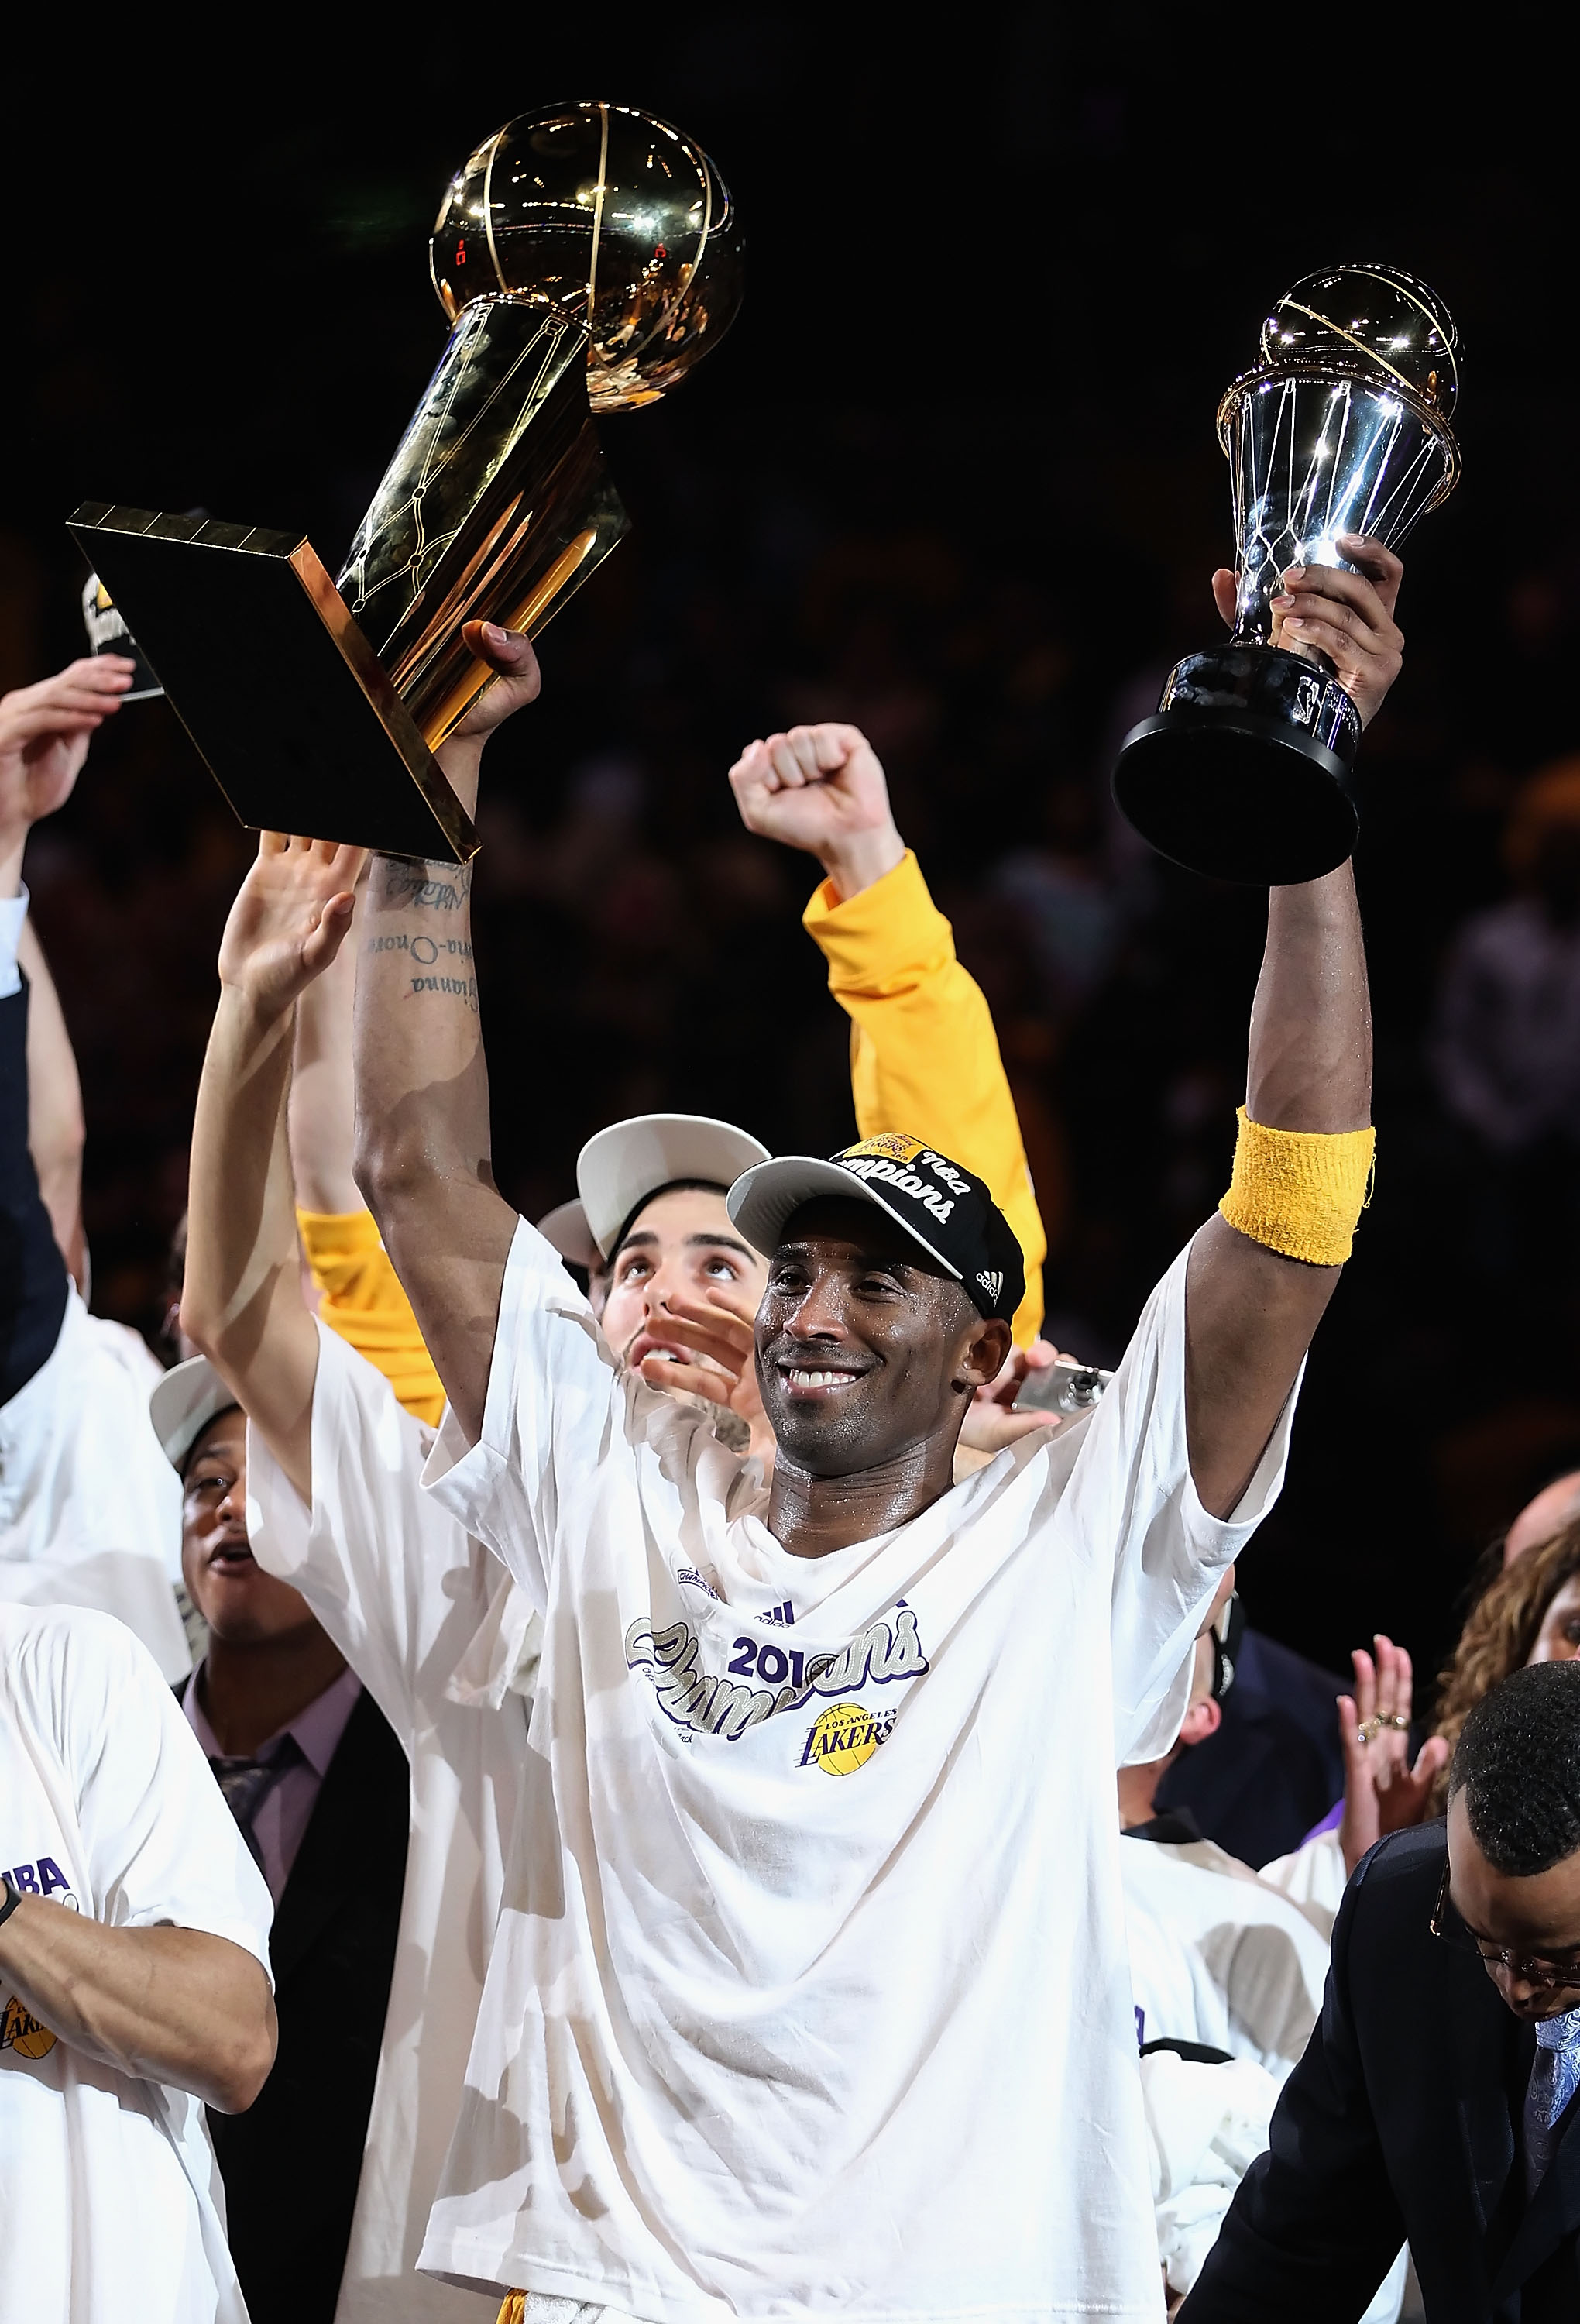 Kobe Bryant's Trophy Case: A Look at The Black Mamba's Top Awards